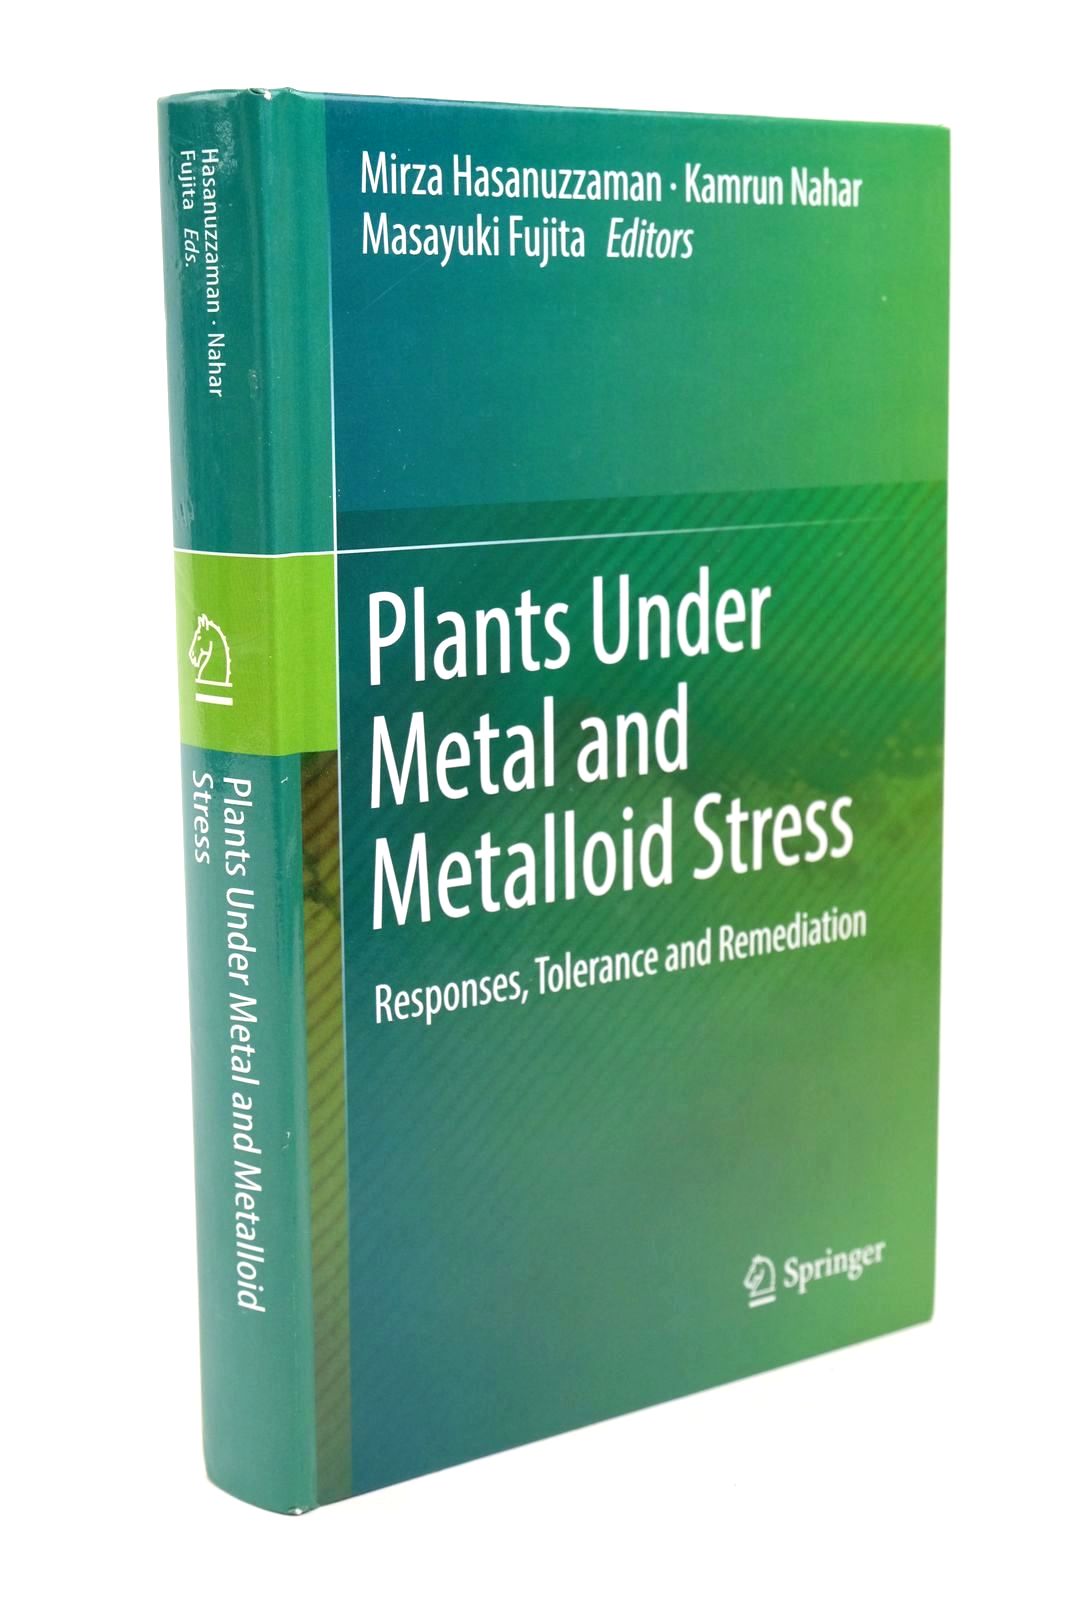 Photo of PLANTS UNDER METAL AND METALLOID STRESS- Stock Number: 1323038